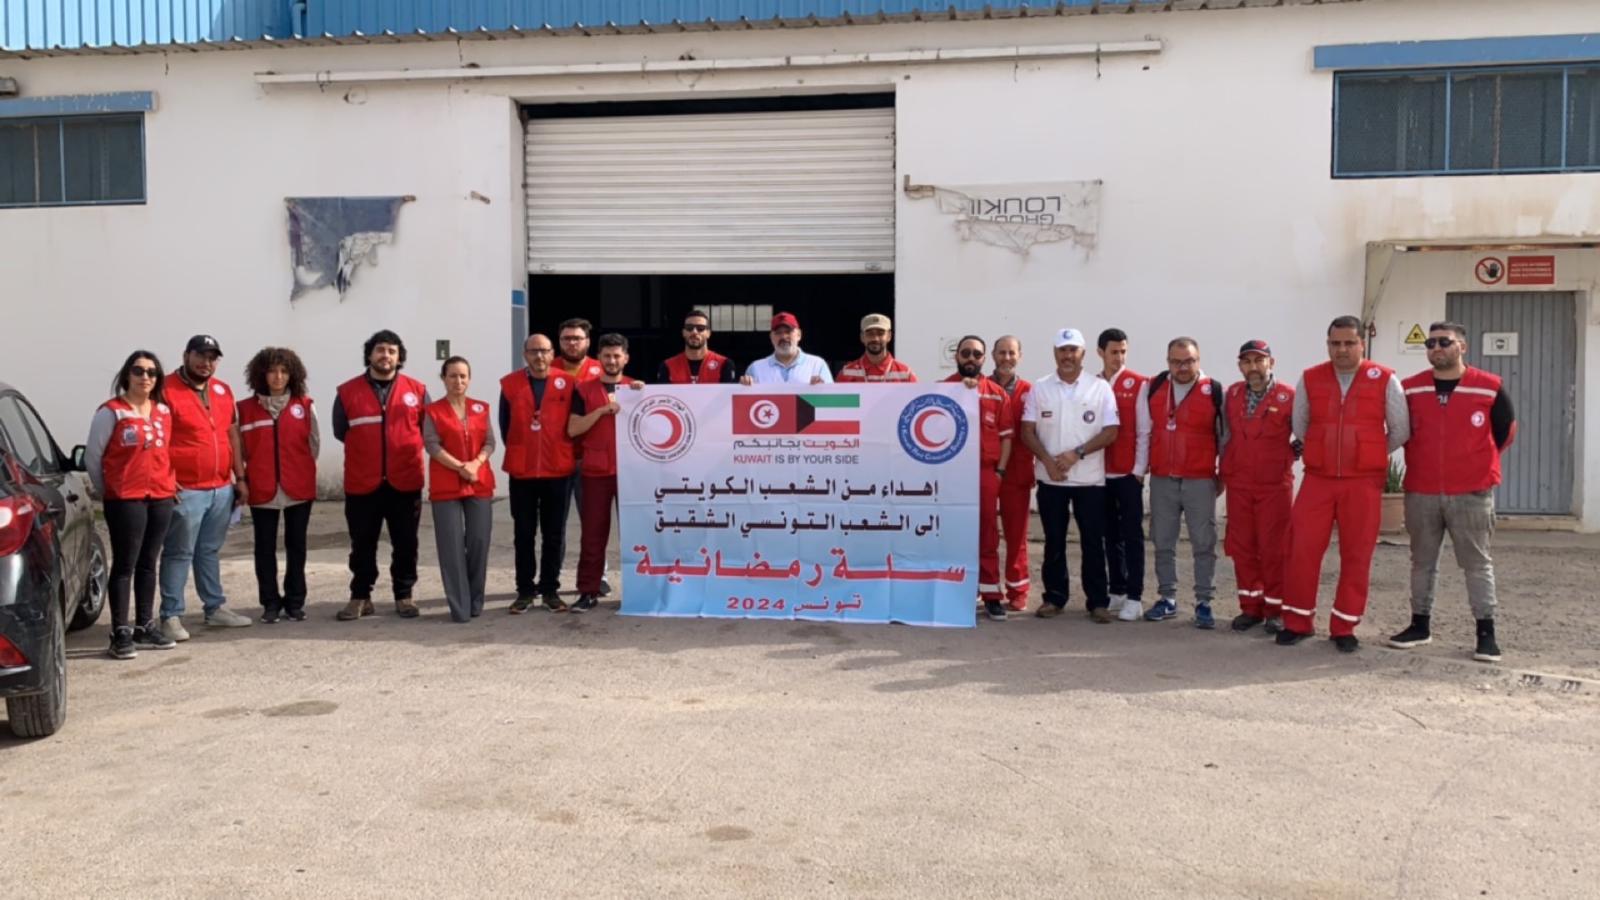 Kuwait Red Crescent Society distributes 2,400 food baskets in Tunisia